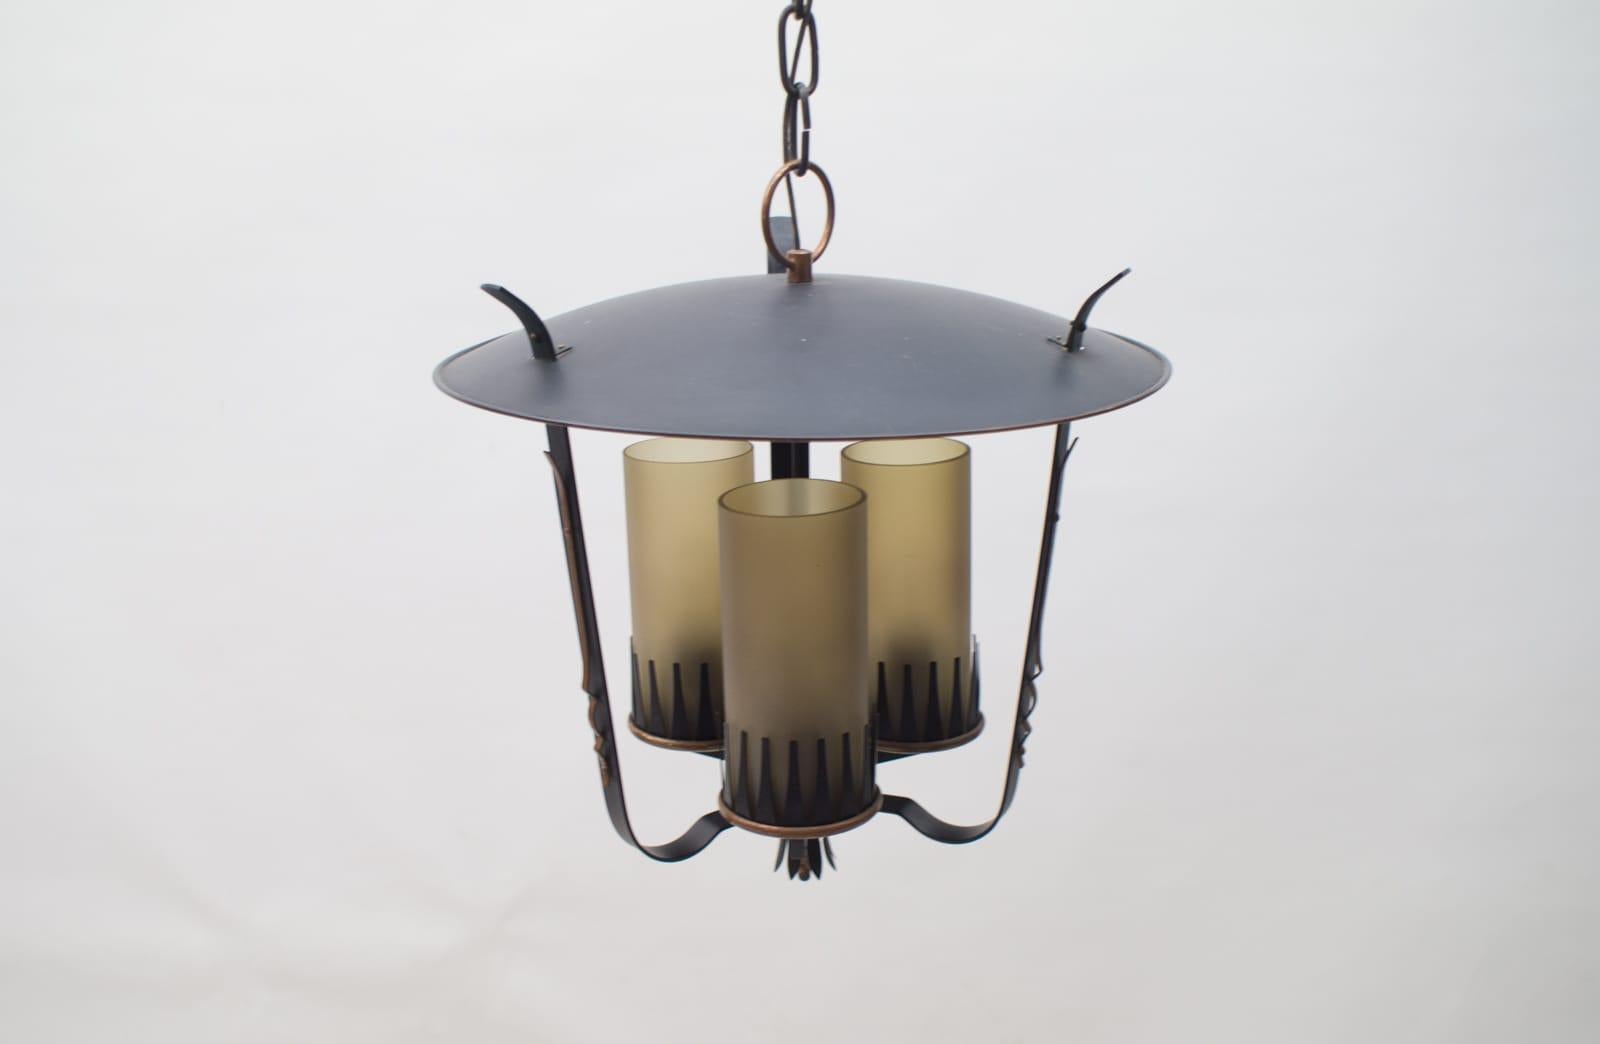 Very Rare Midcentury Pendant Lamp in Copper and Satinized Cylindrical Glass 1